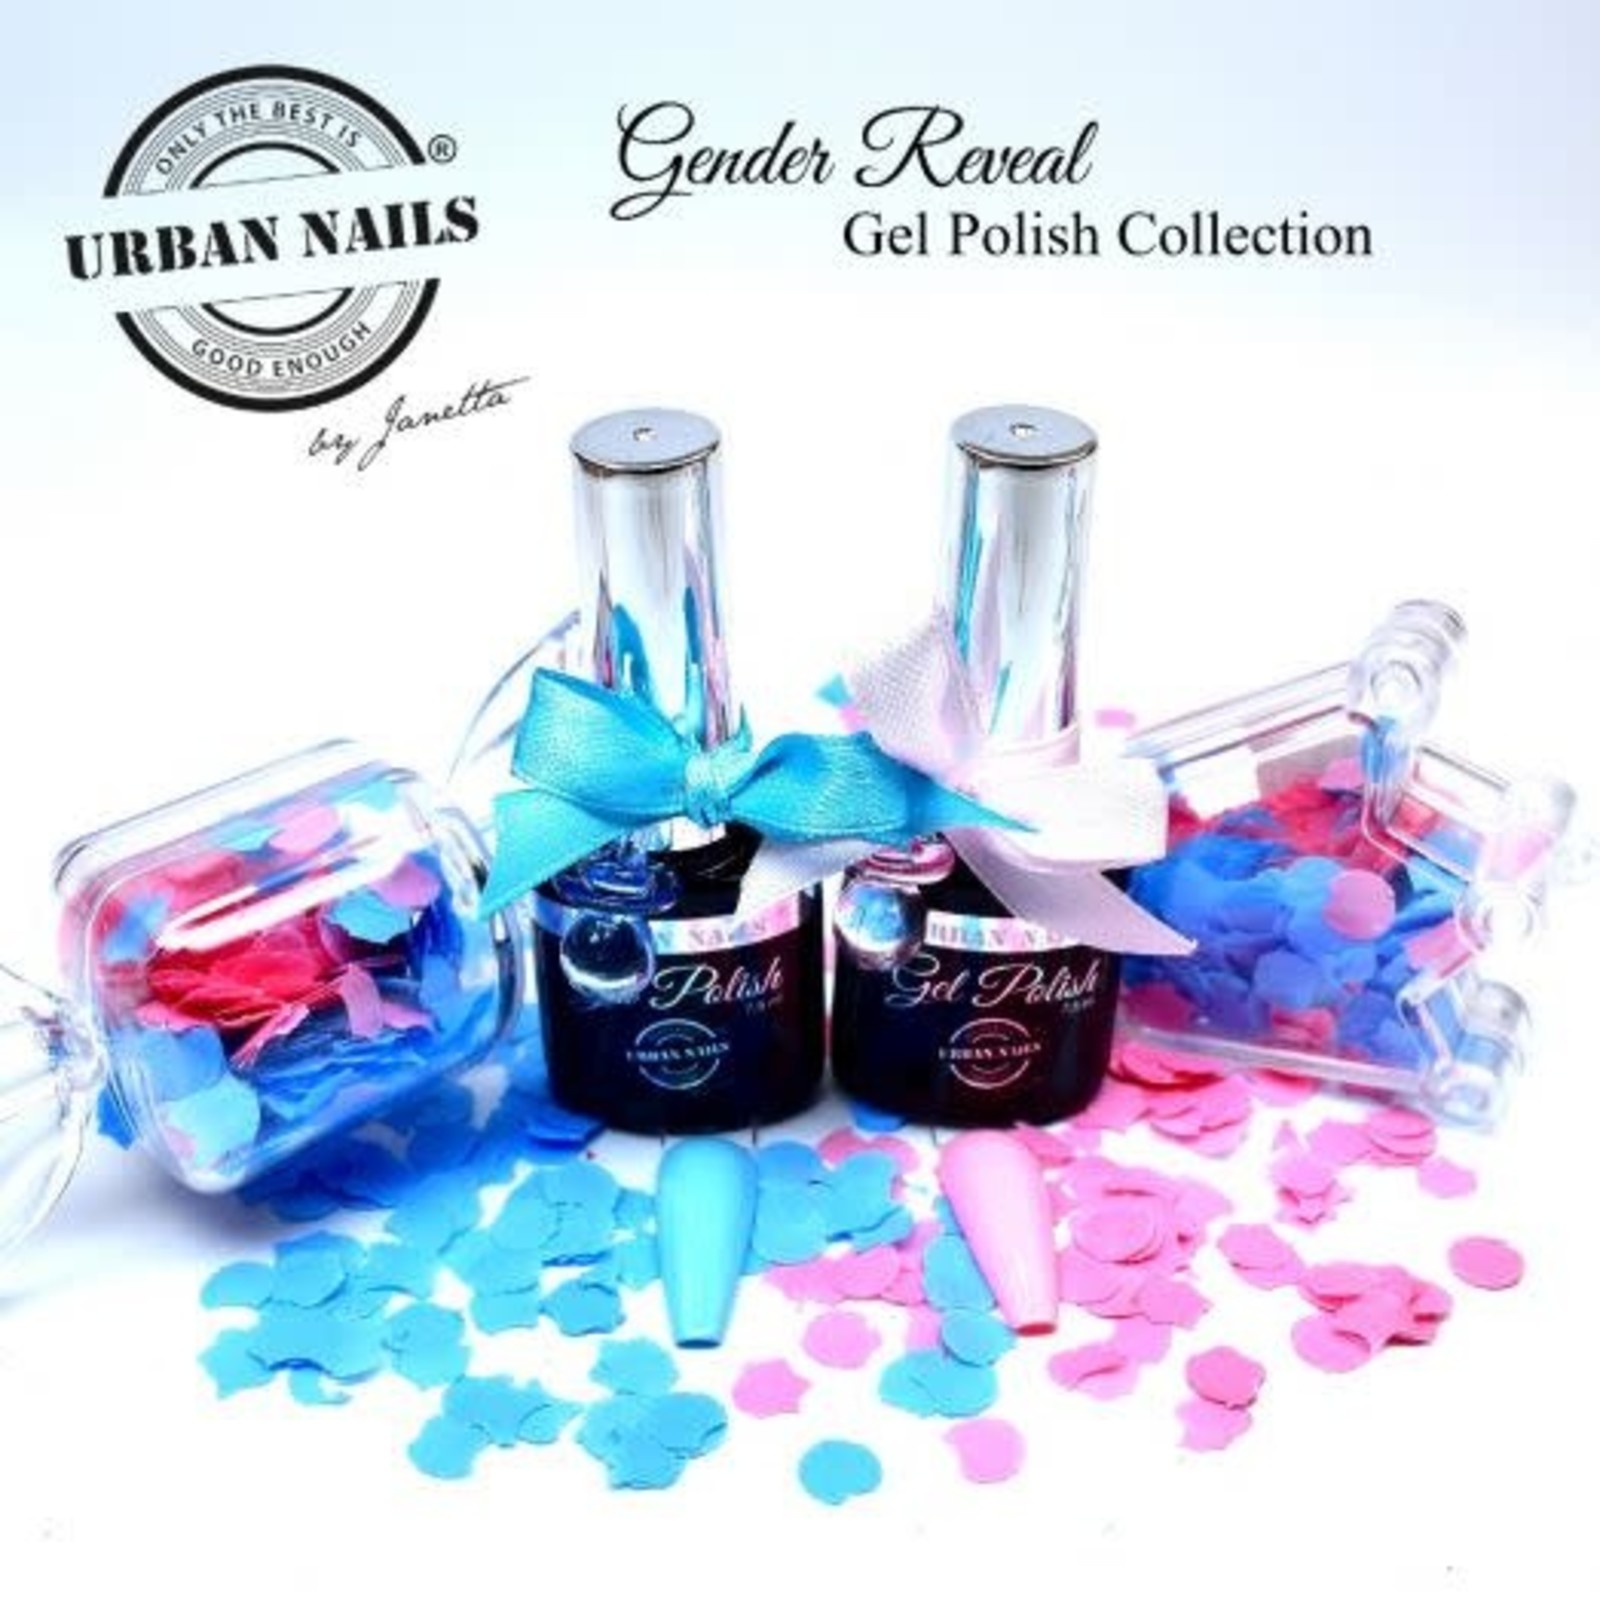 Urban nails Gender reveal collection